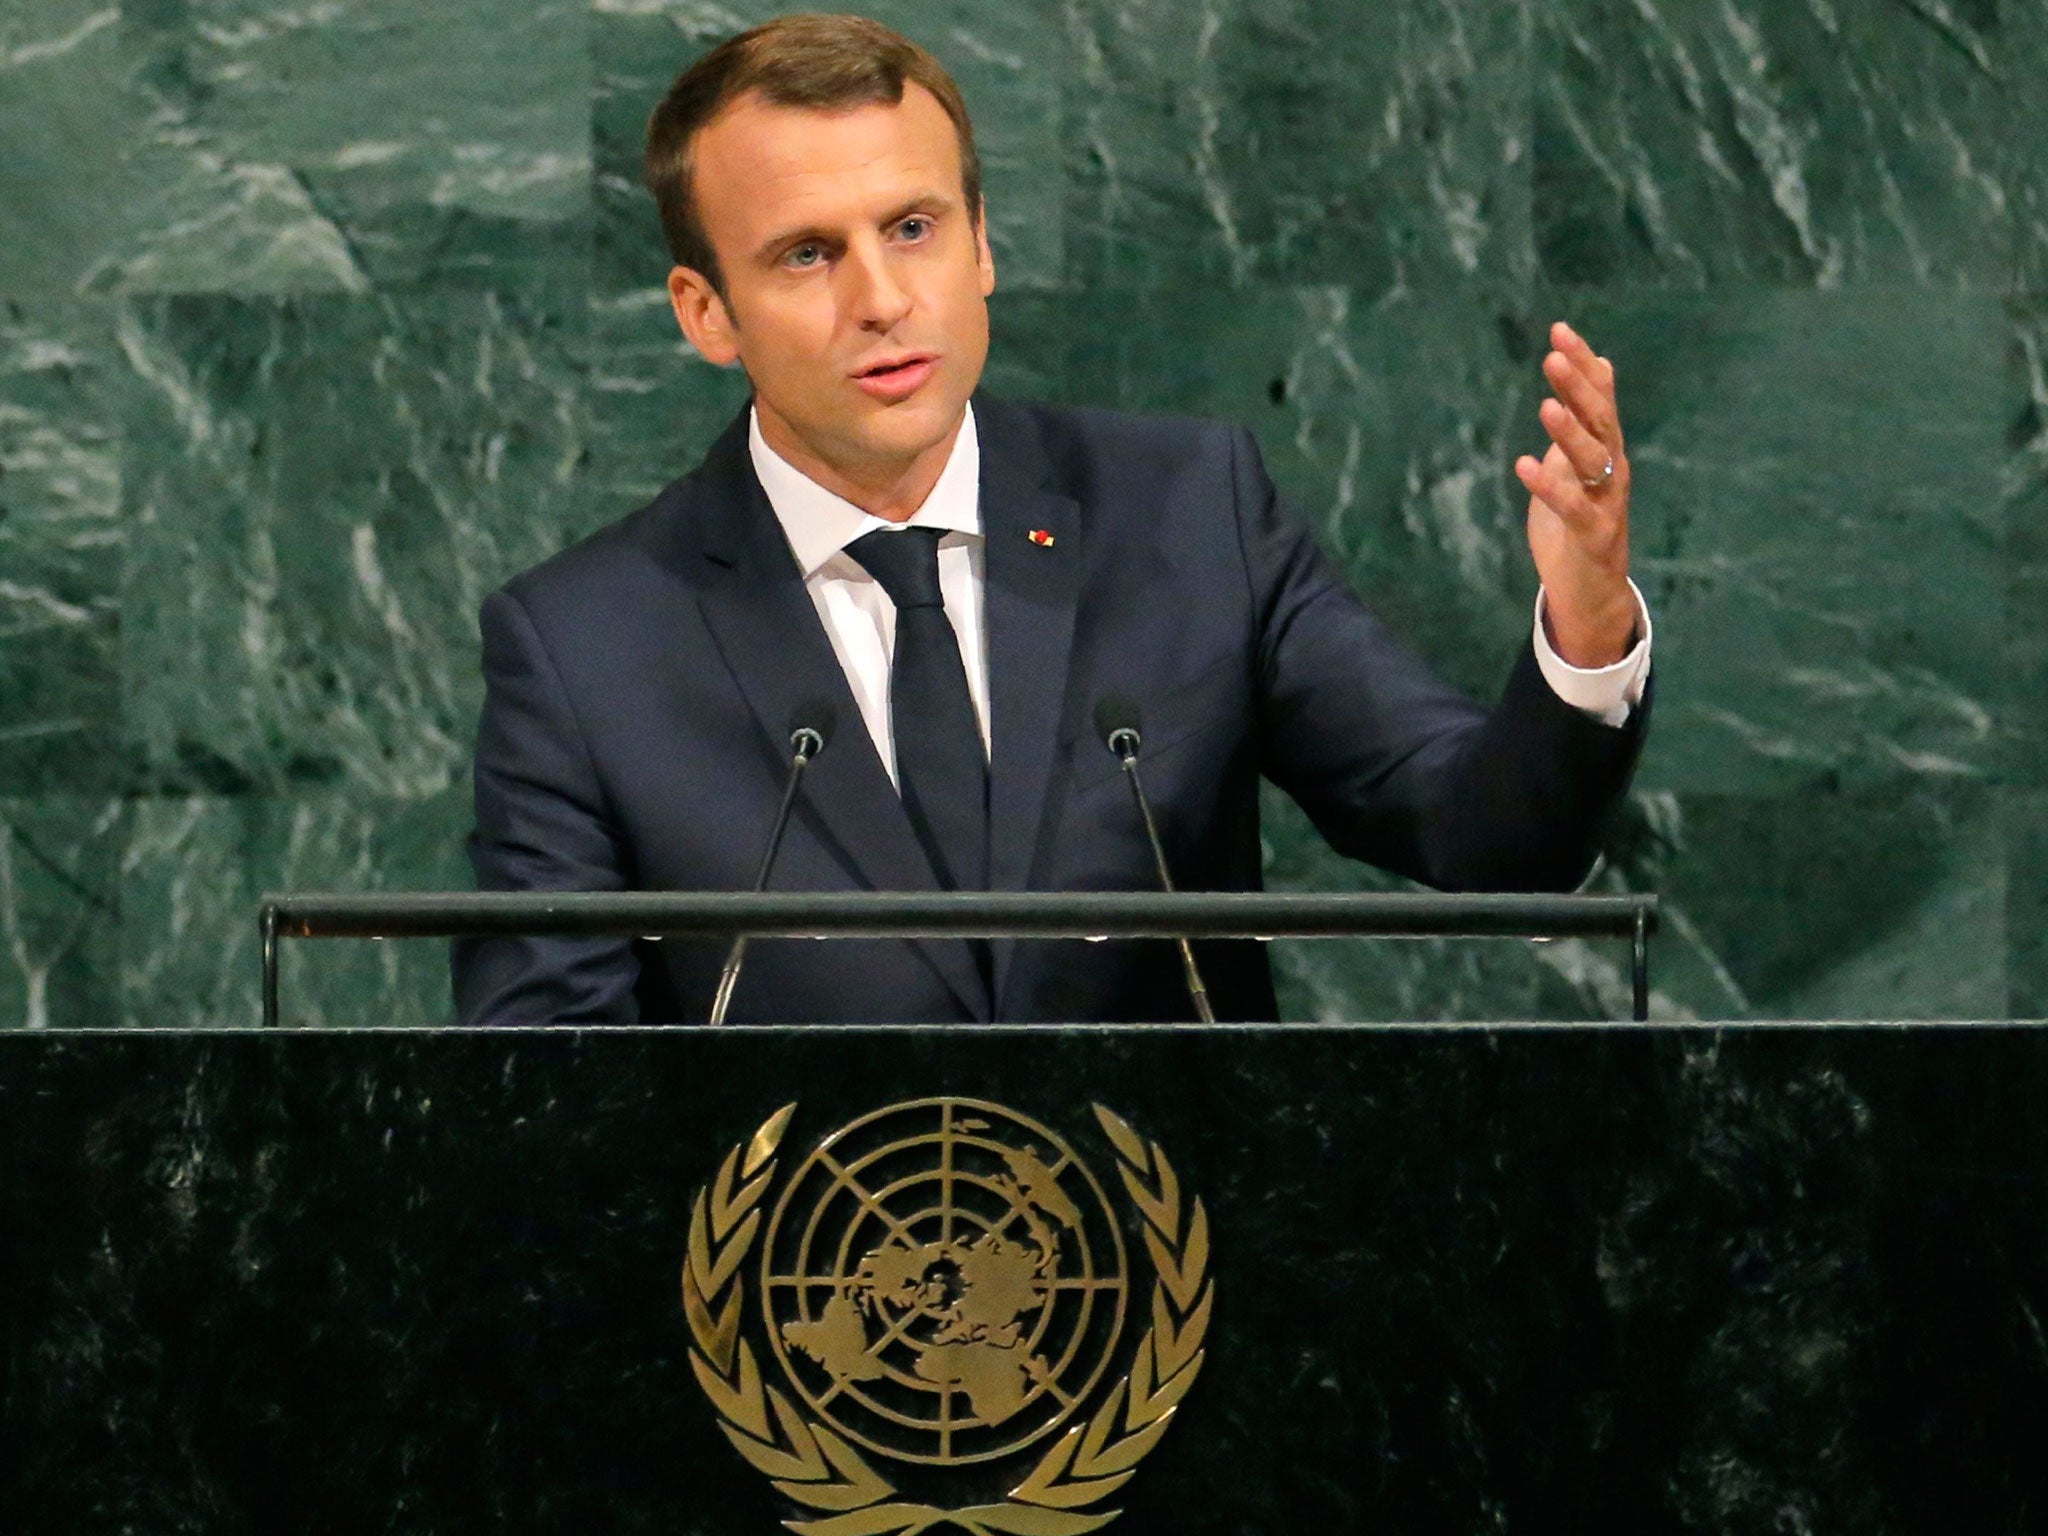 Paris agreement: Macron says climate deal will not be renegotiated despite Trump&apos;s demands